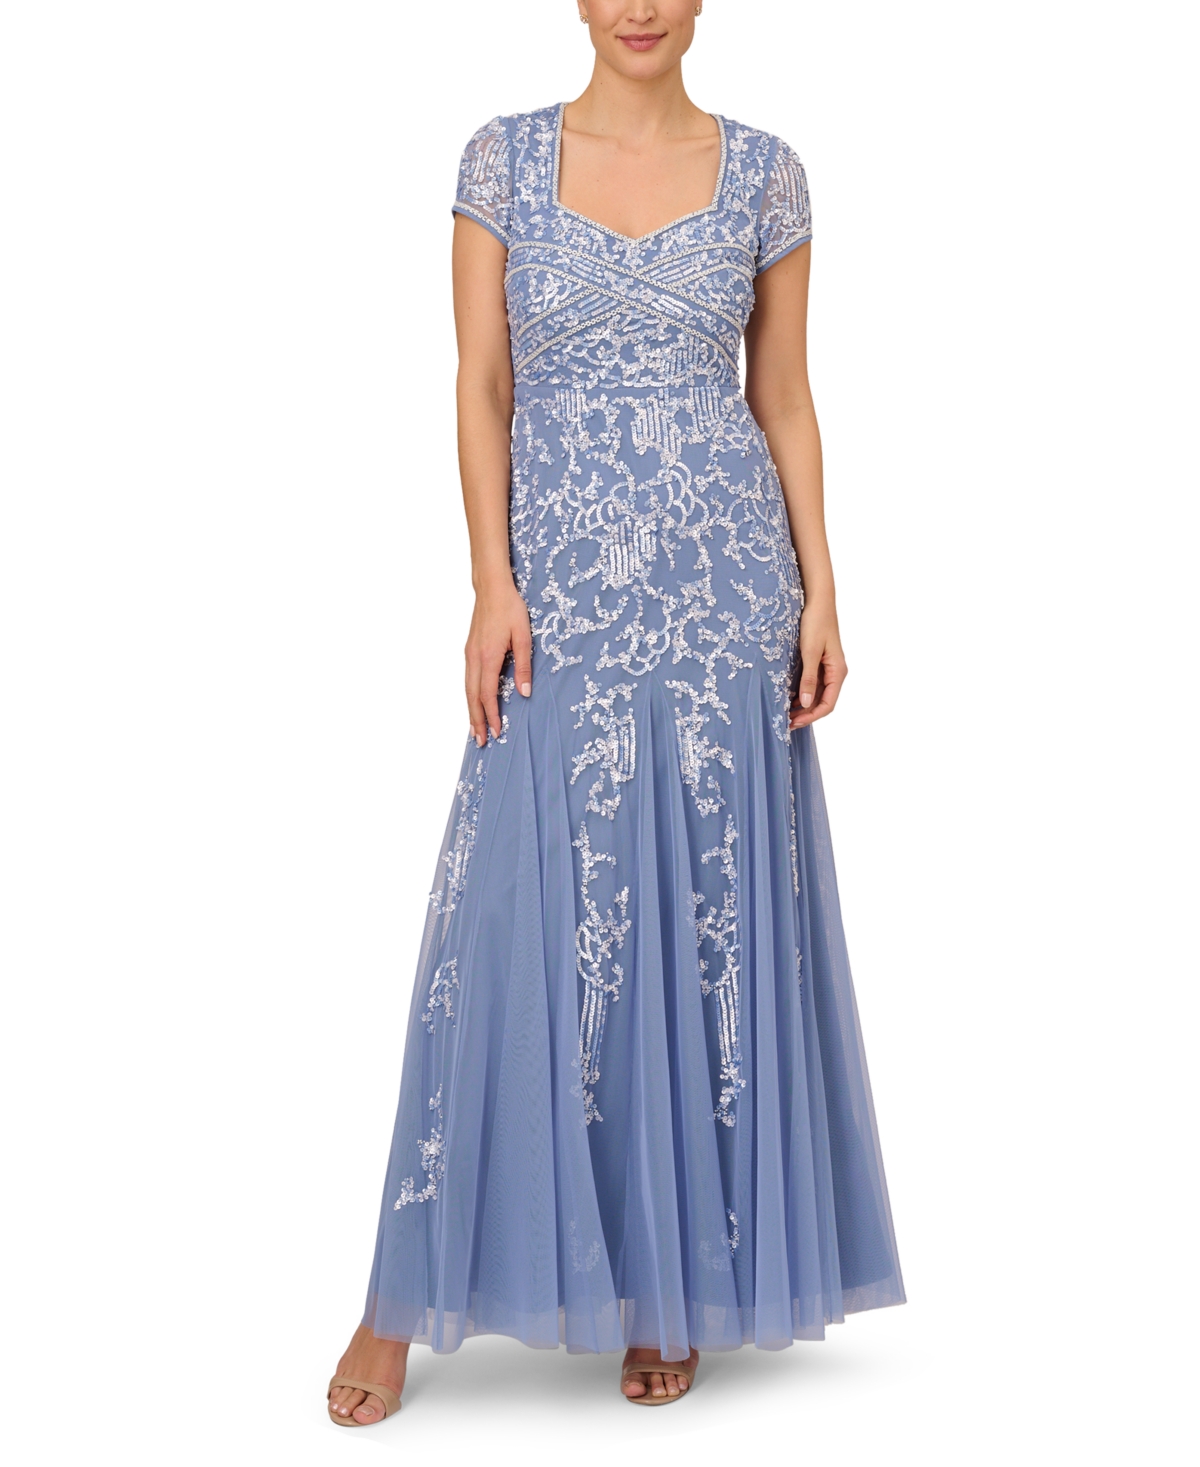 1920s Fashion & Clothing | Roaring 20s Attire Adrianna Papell Embellished Godet Gown - French Blue $349.00 AT vintagedancer.com